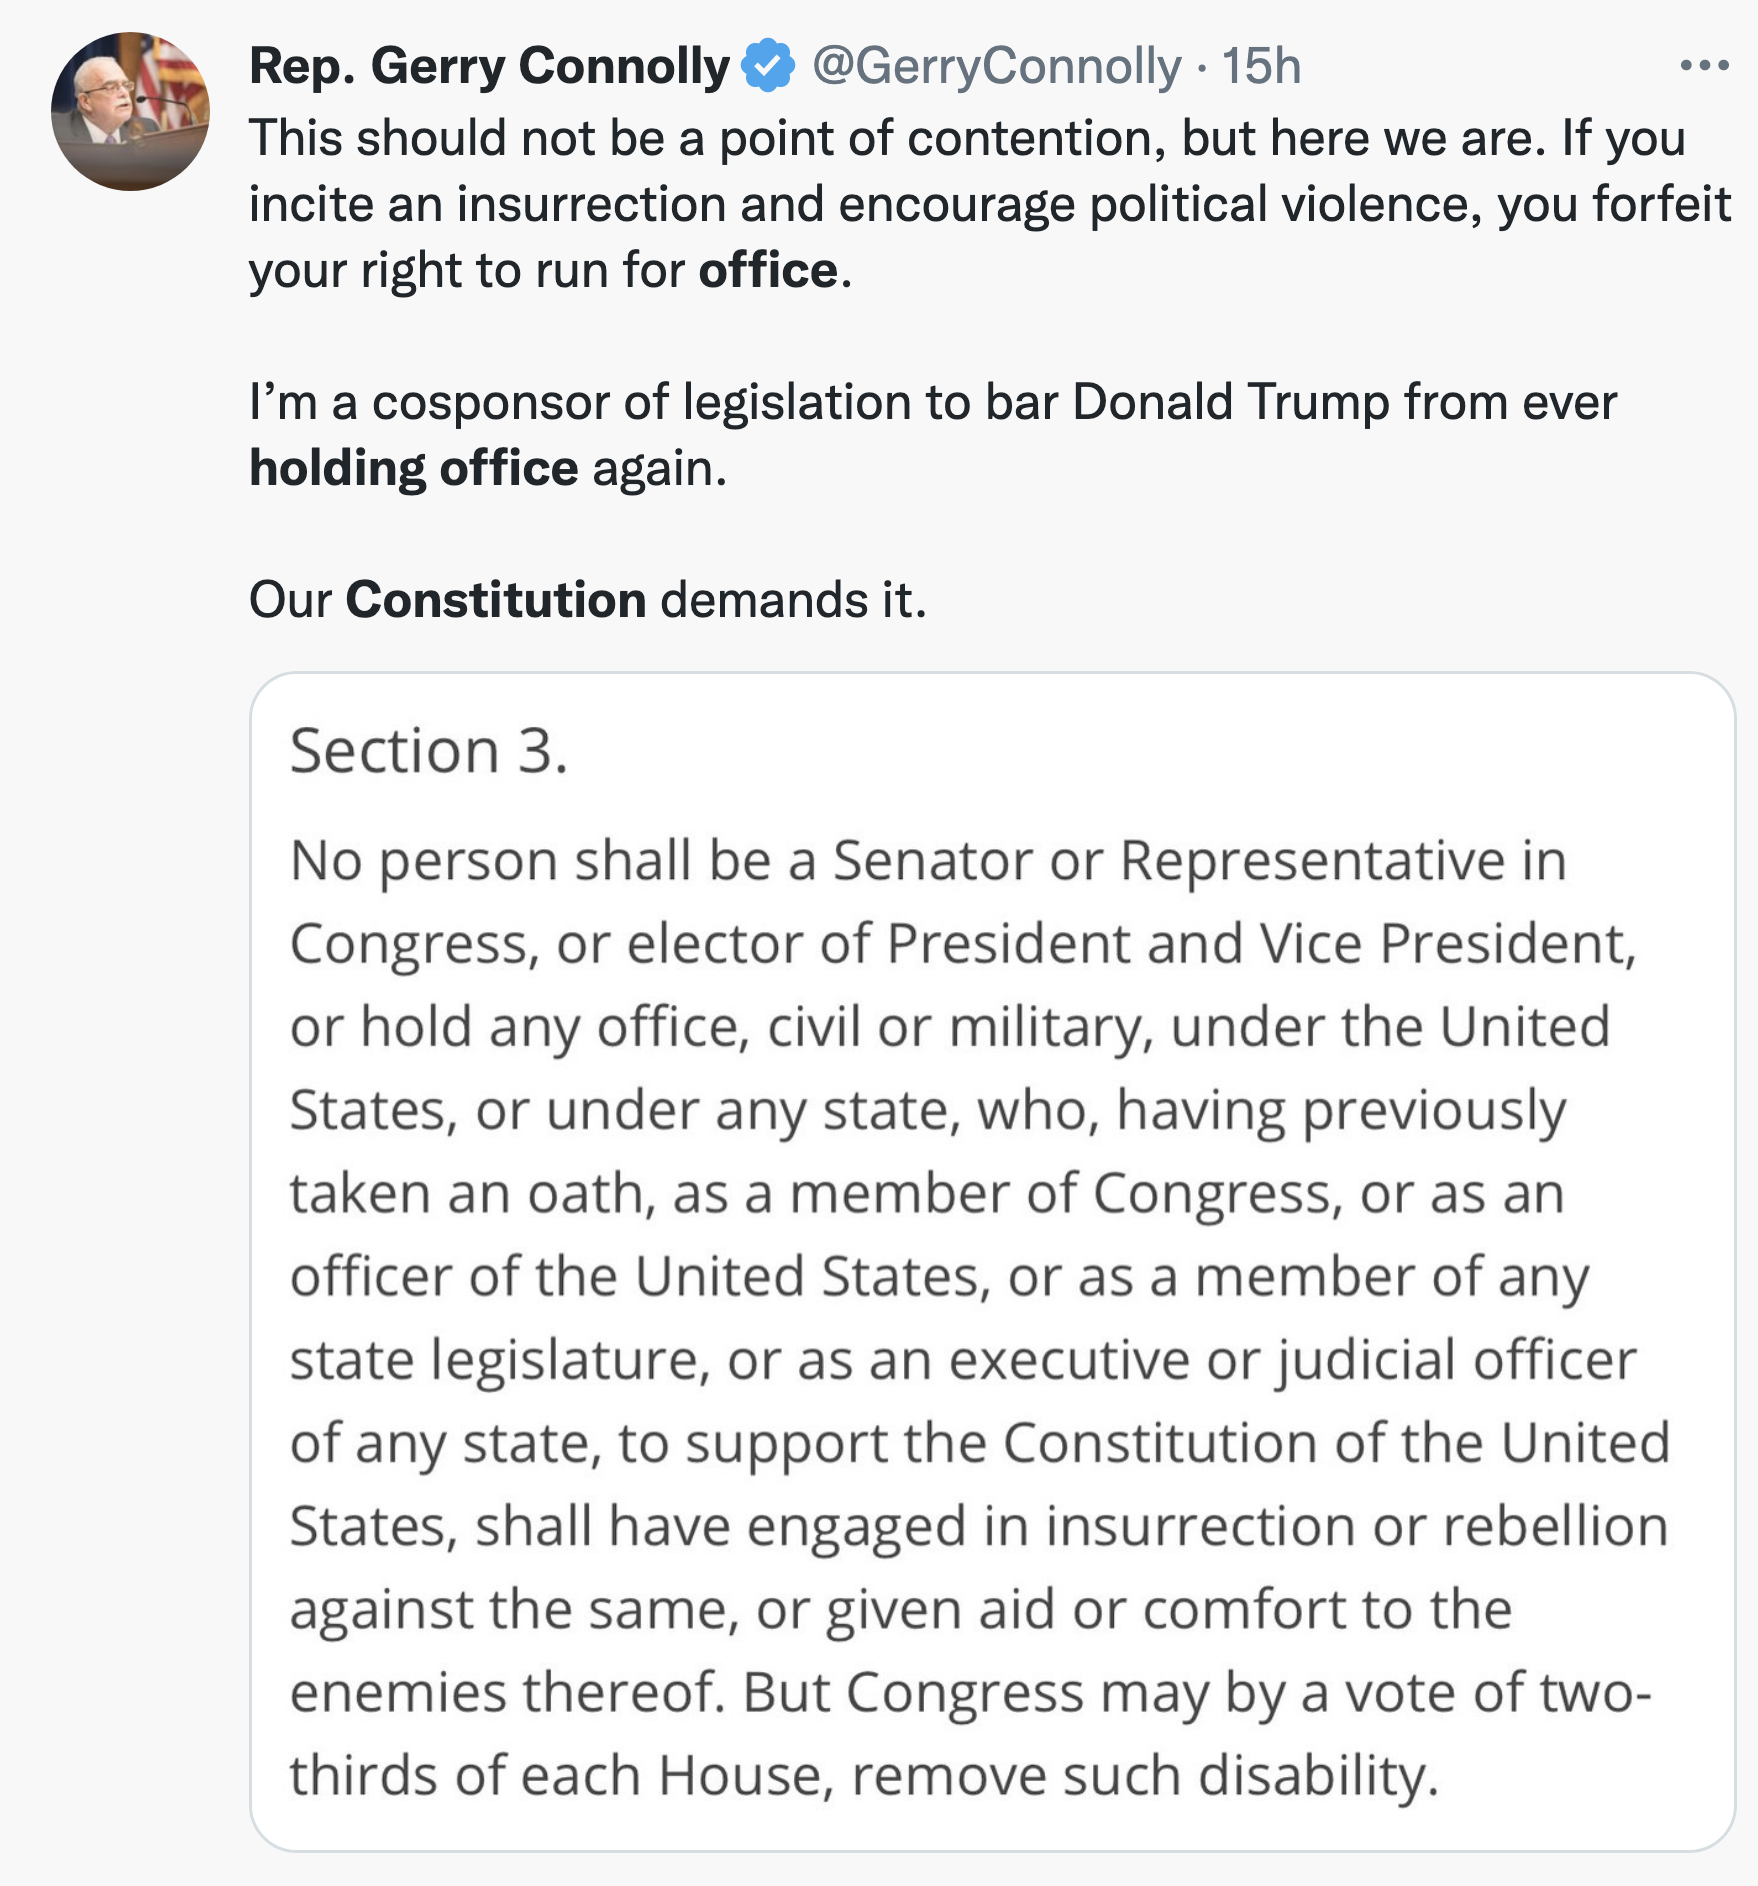 Screen-Shot-2022-12-16-at-9.08.55-AM Invocation Of 14th Amendment To Stop MAGA & Save Democracy Proposed Crime Donald Trump Featured Politics Top Stories 